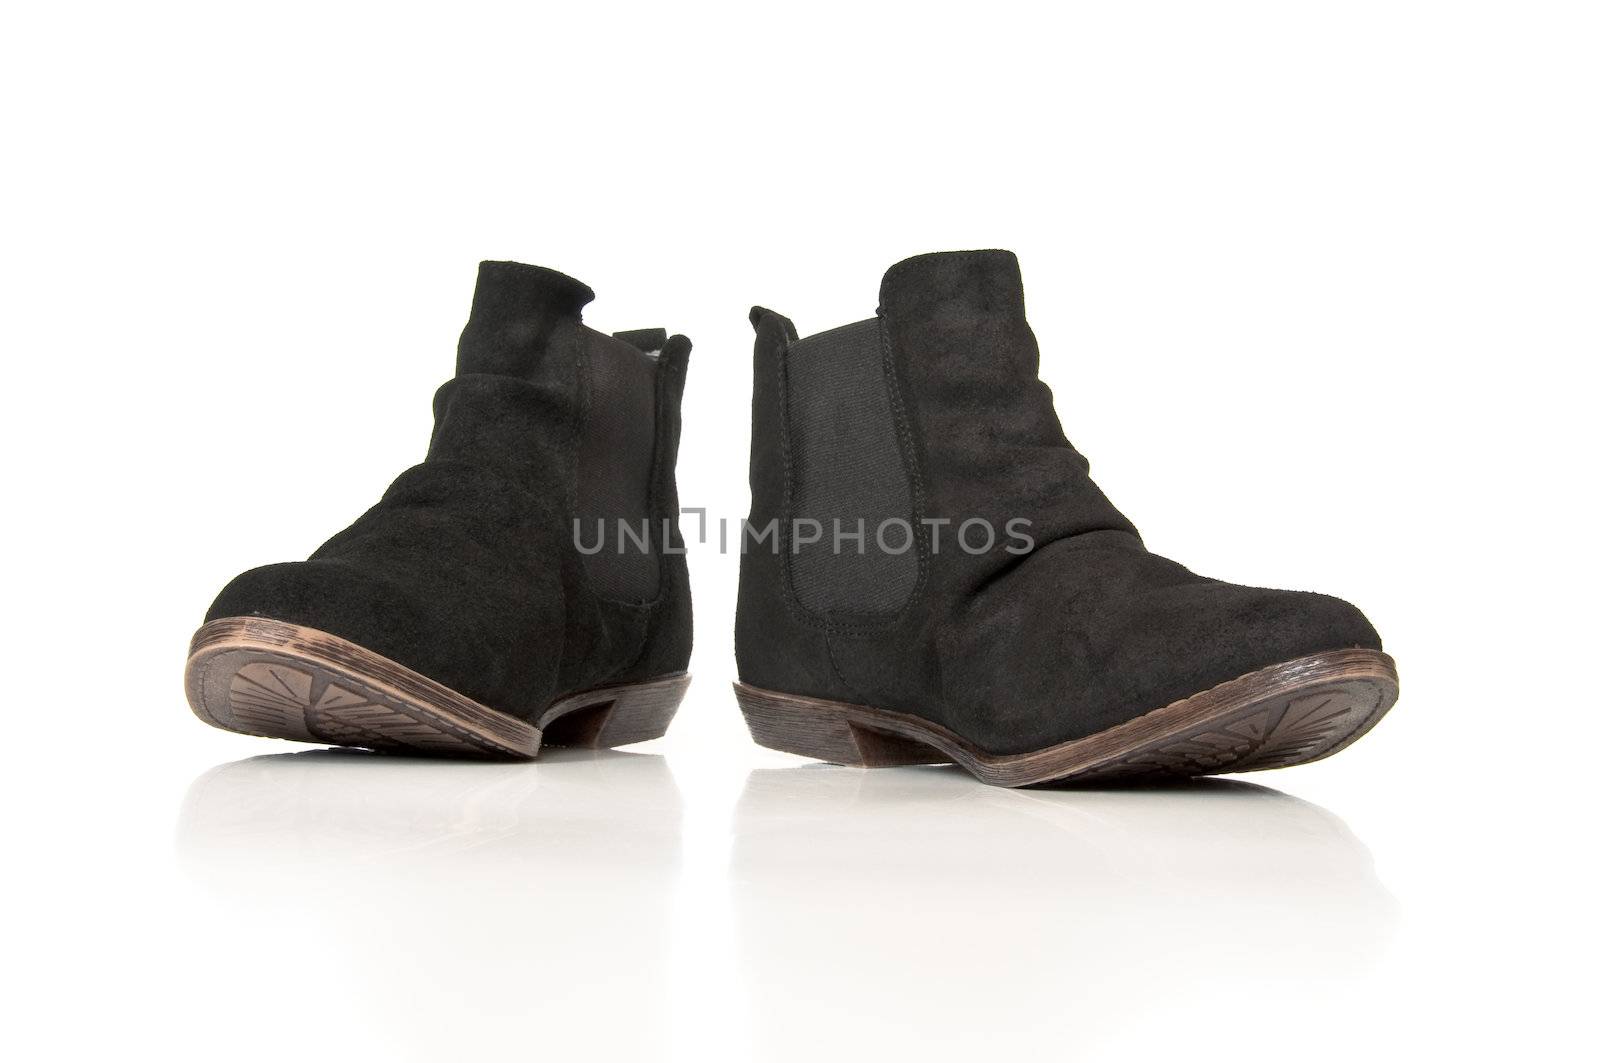 Black leathers boots on a white background